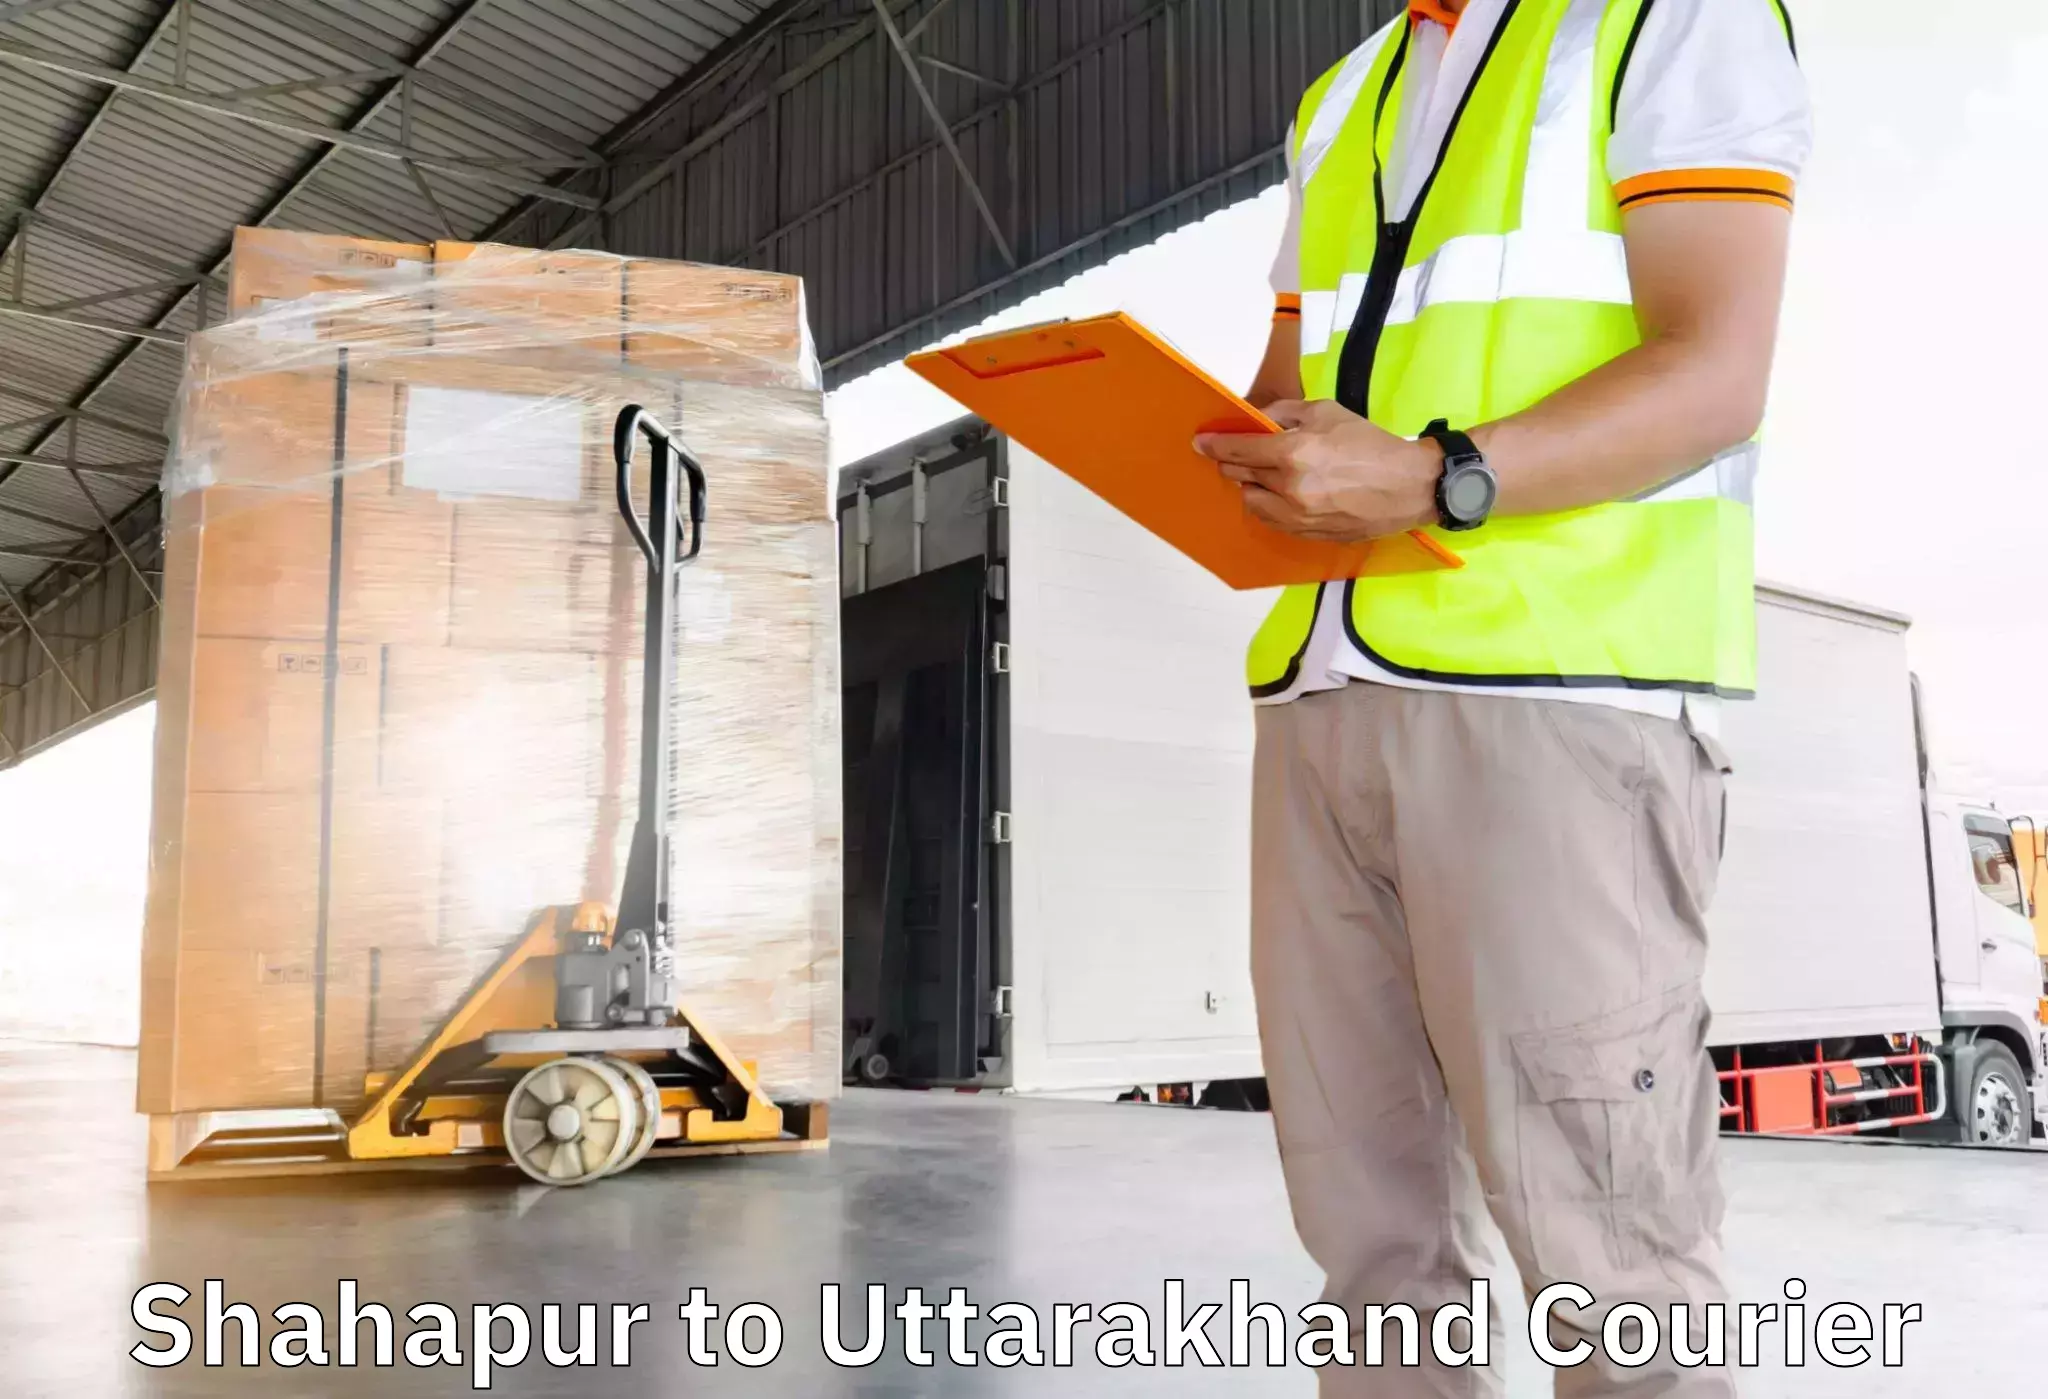 Trusted relocation experts Shahapur to Kashipur